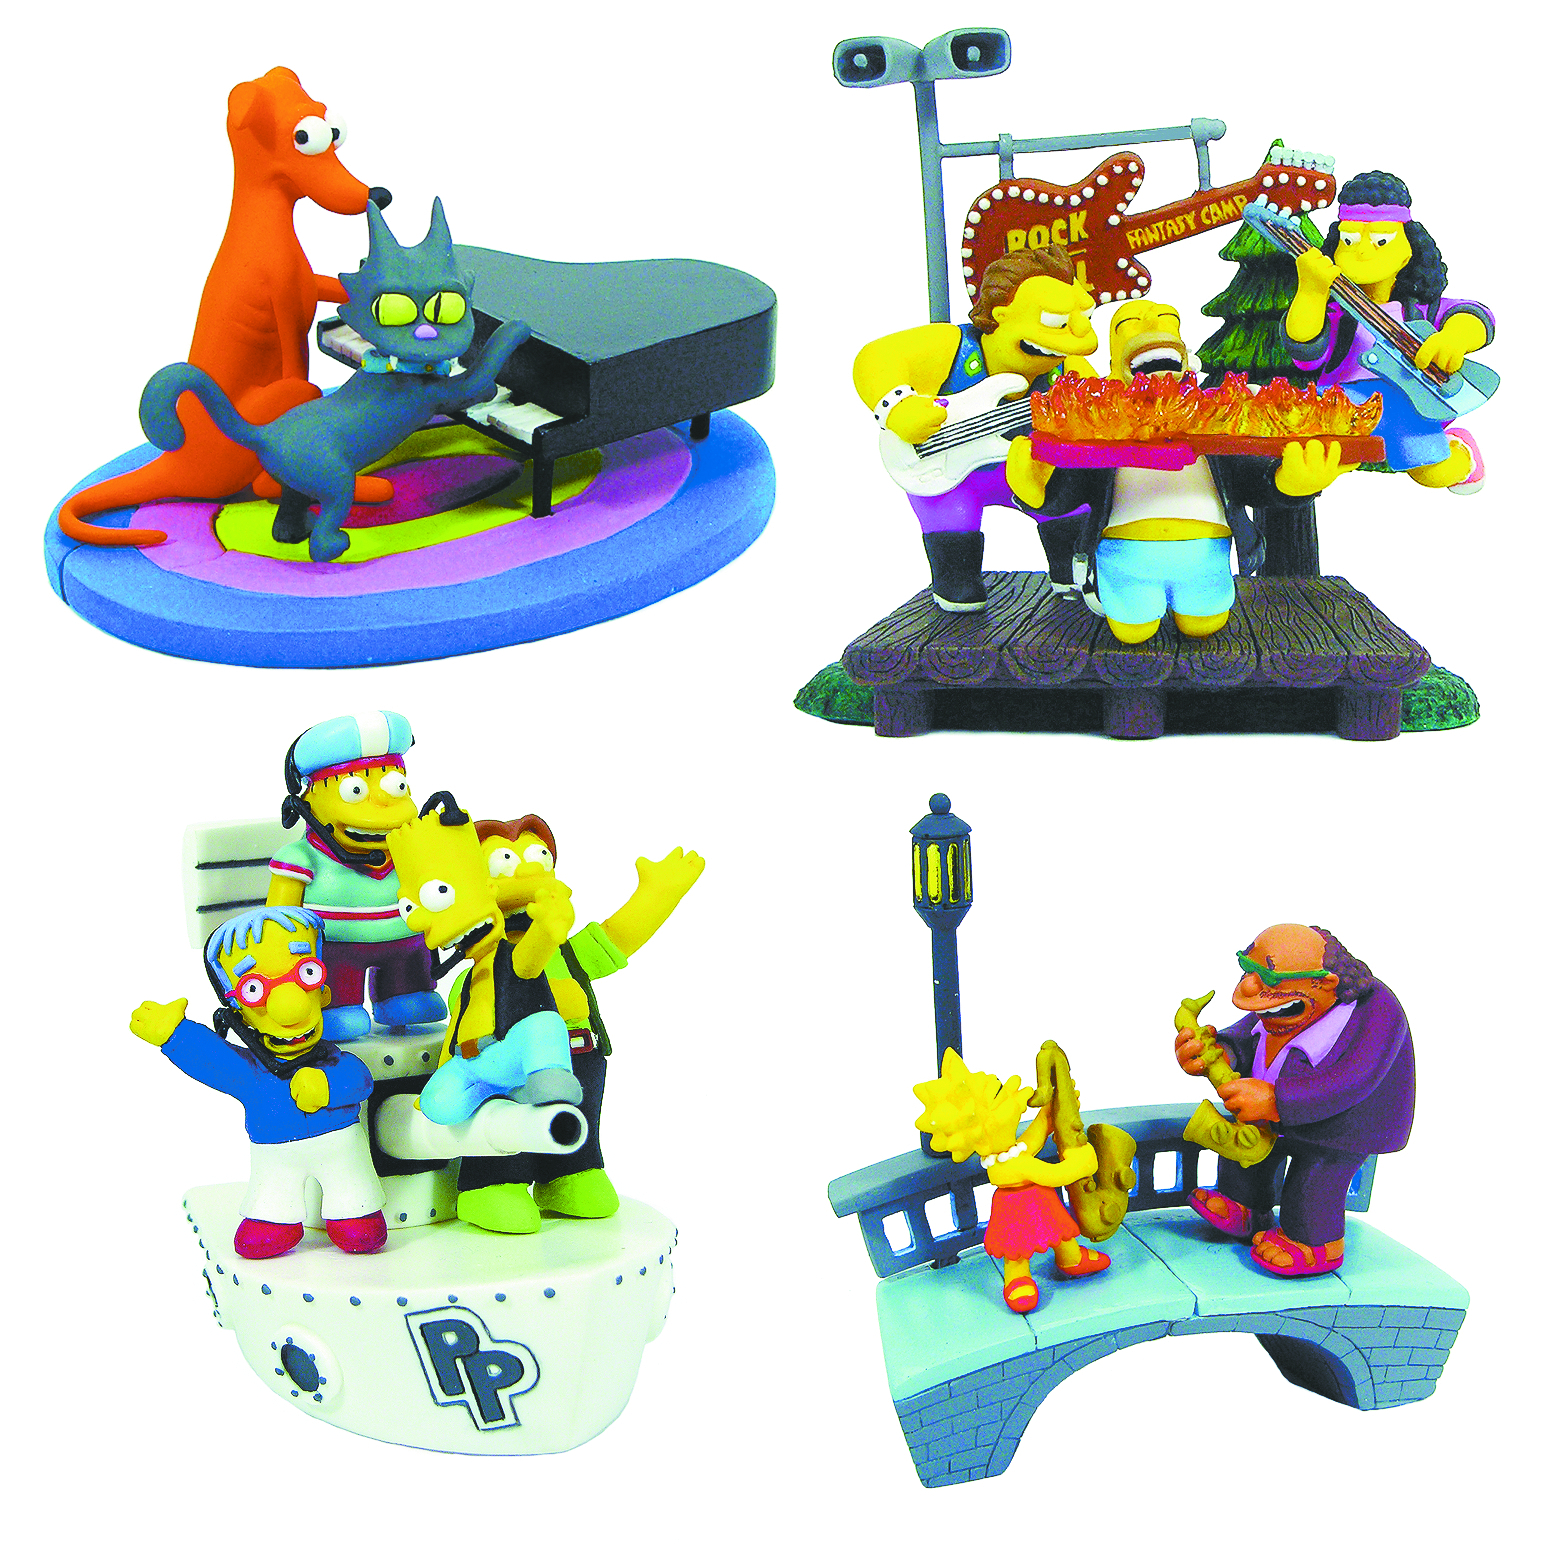 Details about   GENTLE GIANT BUST UPS THE SIMPSONS SERIES 5 HOMER AND MARGE MINI FIGURE KIT 